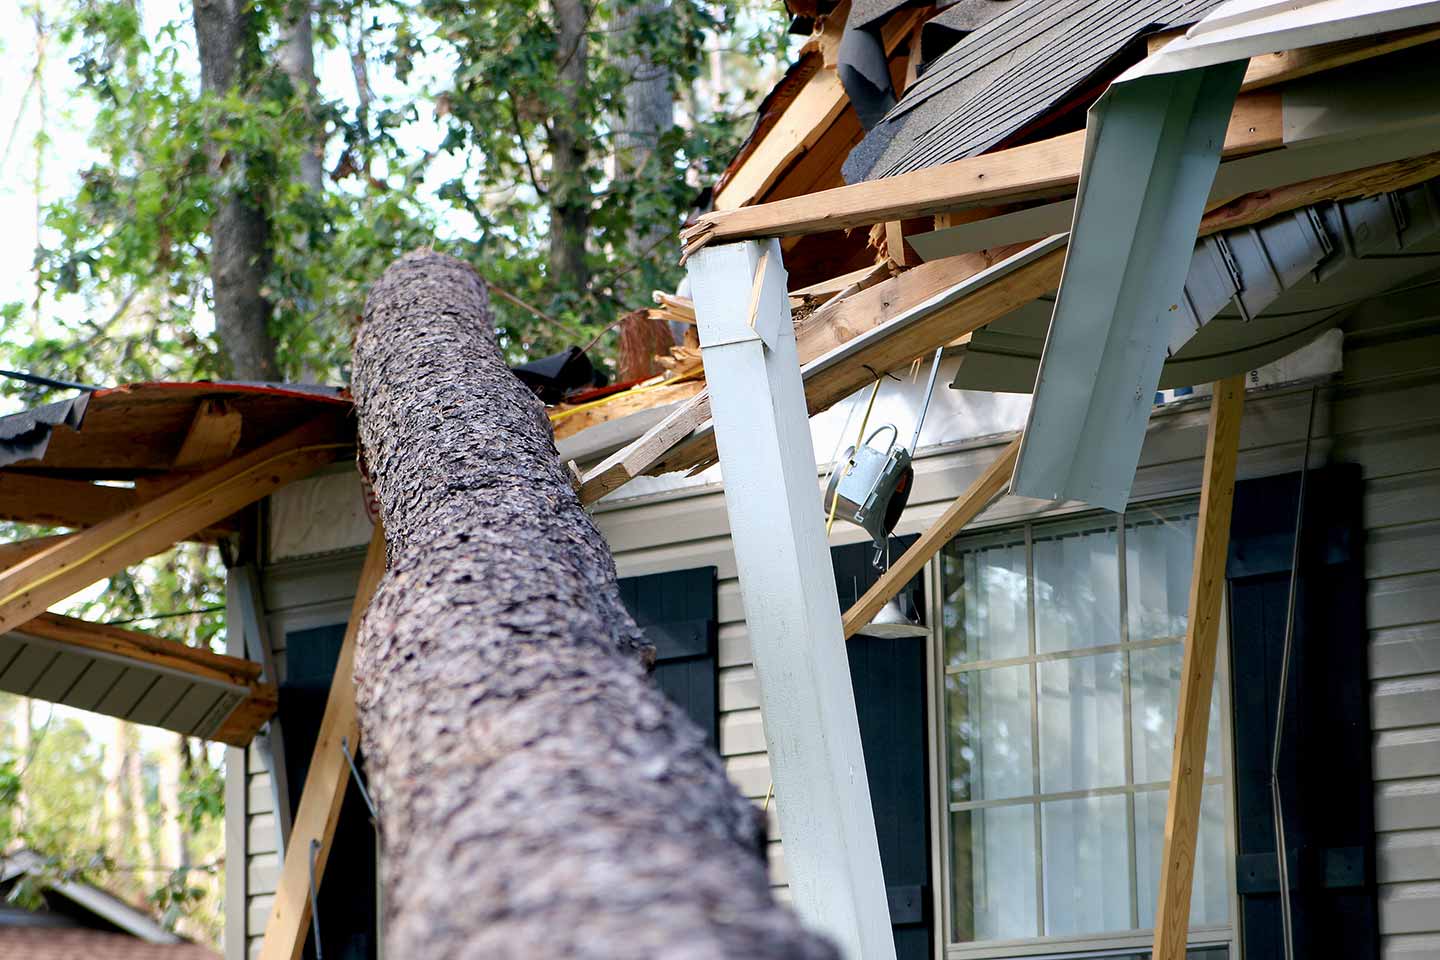 A tree is blown over into a damaged house